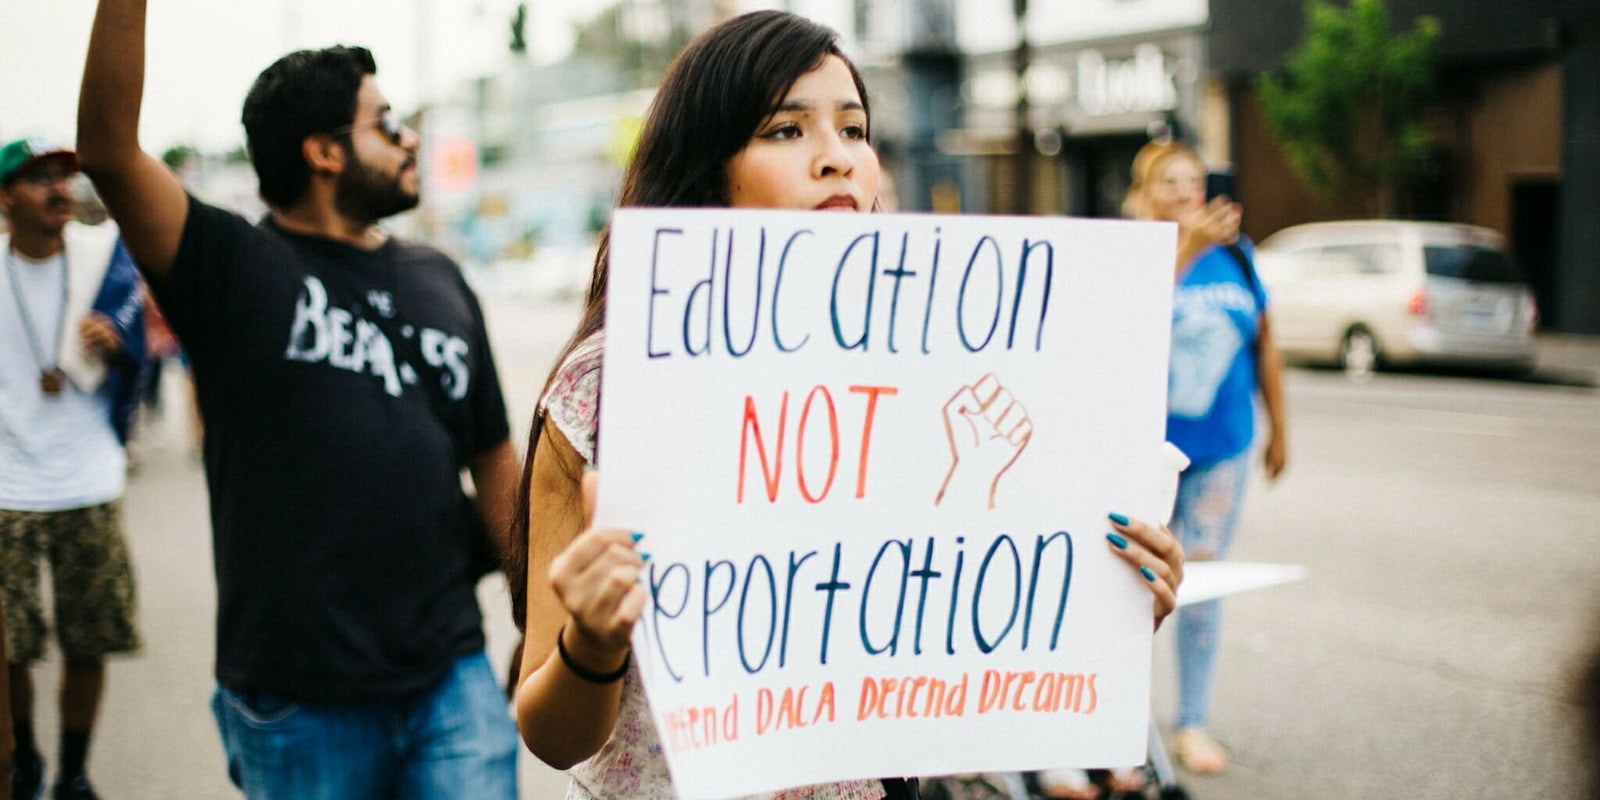 A woman holds a sign with the phrase 'Education not Deportation, Defend DACA Defend Dreams' at the Los Angeles March for Immigrant Rights.